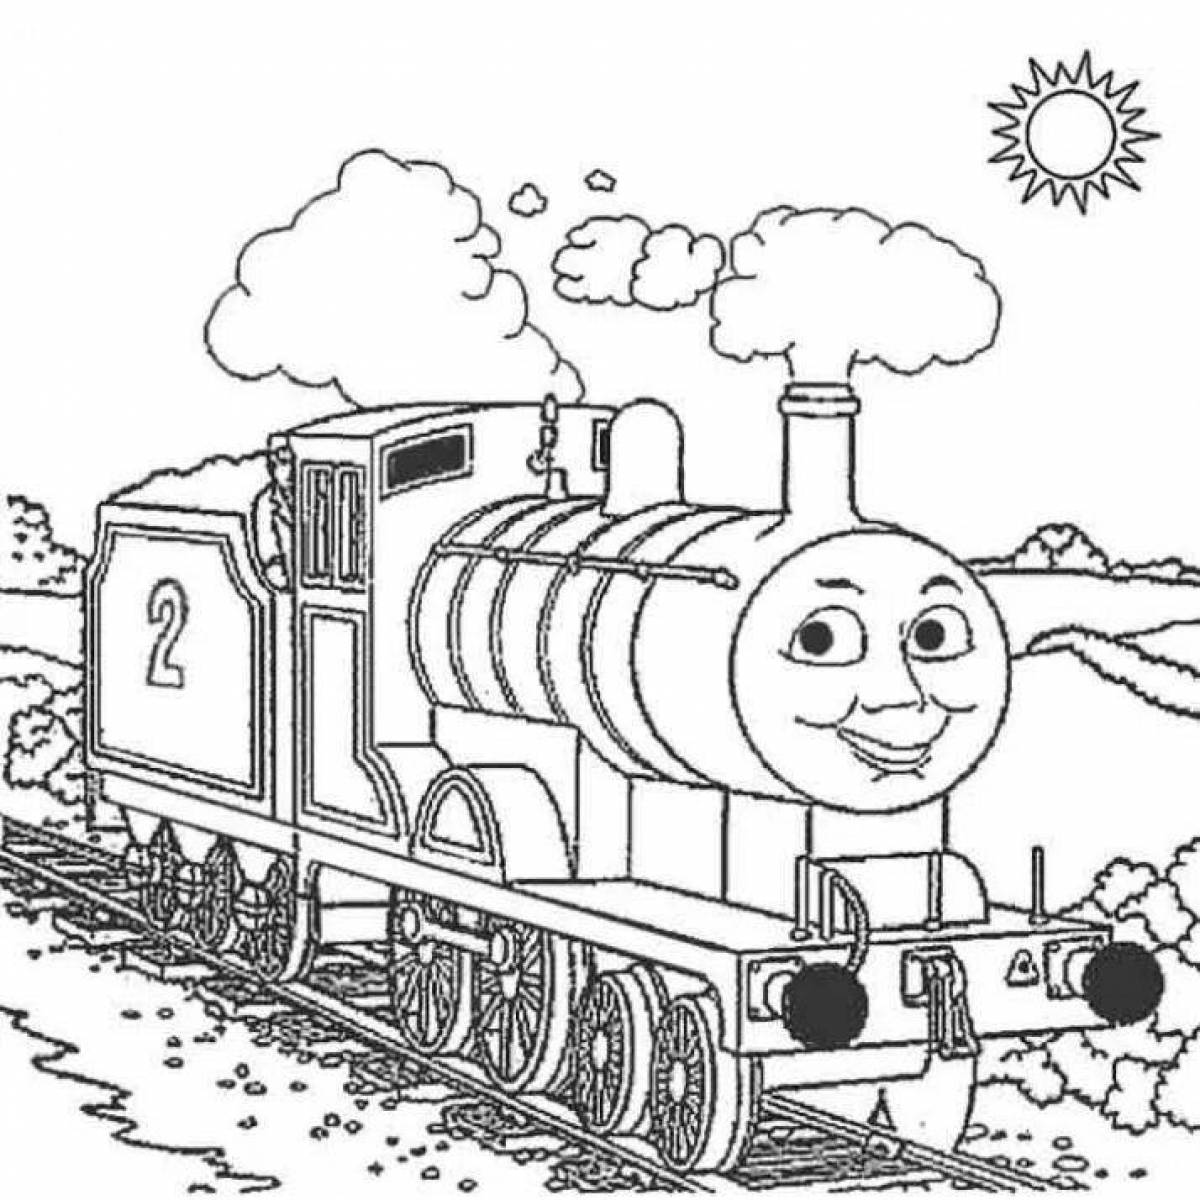 Colorful thomas the tank engine coloring page